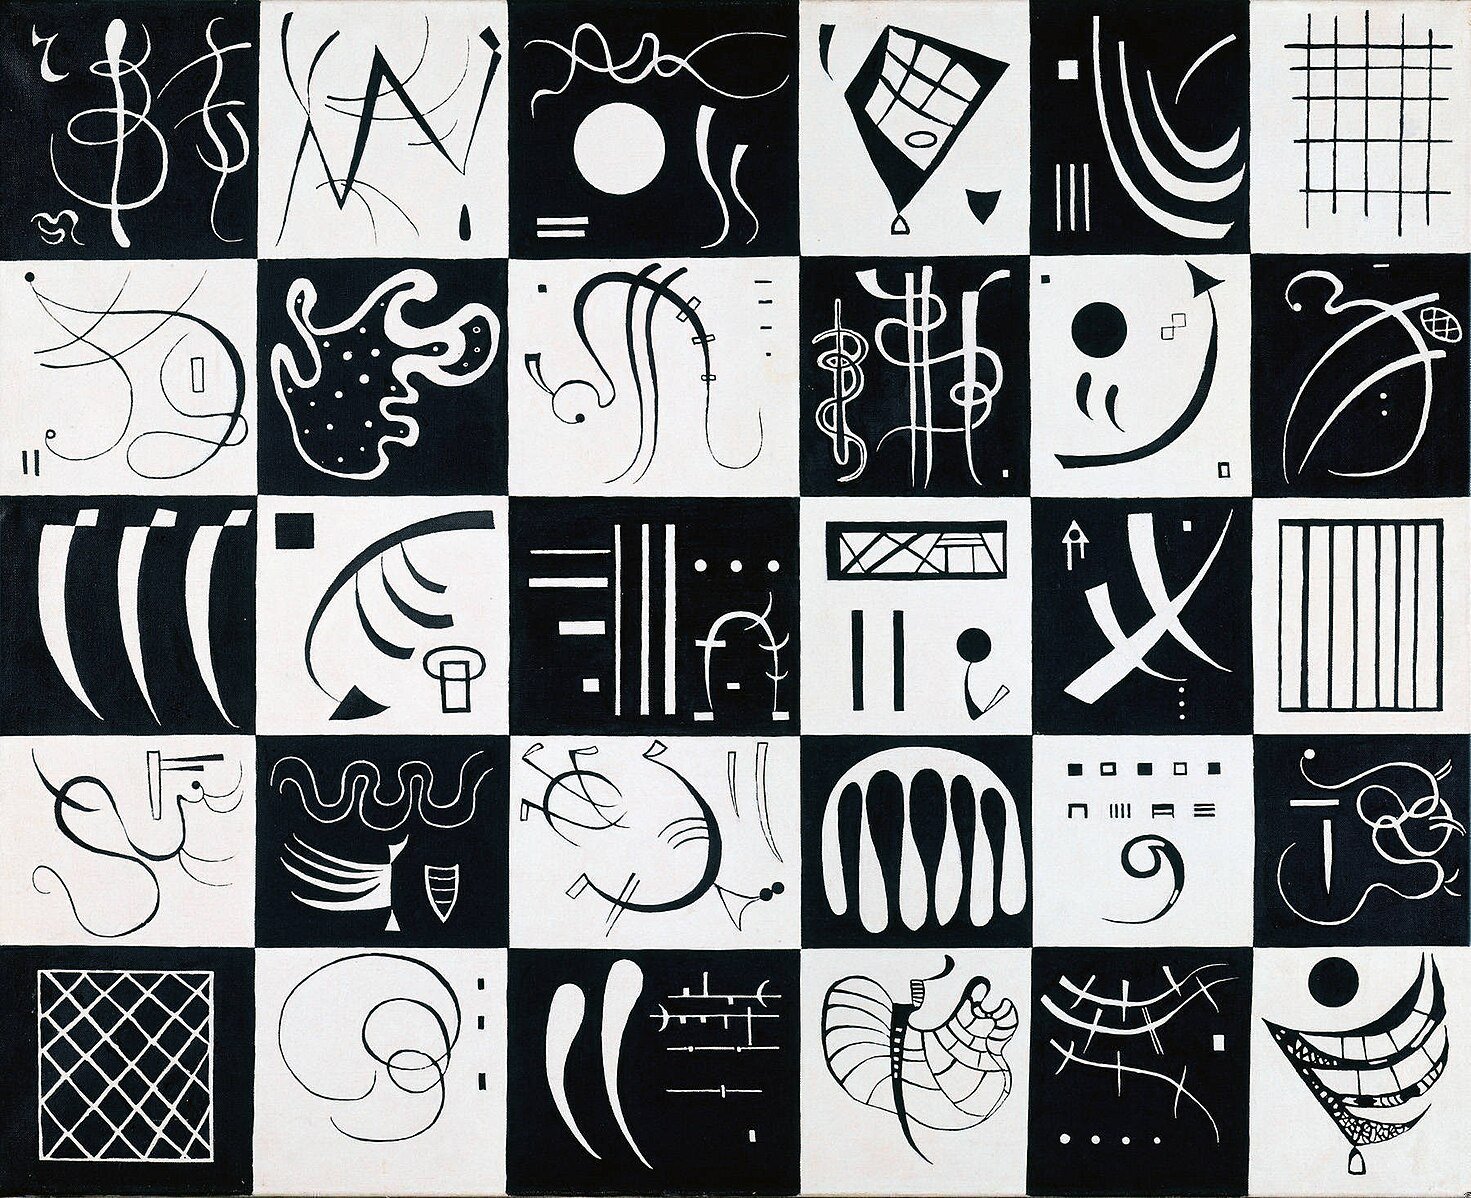 A grid of abstract shapes by Wassily Kandinsky